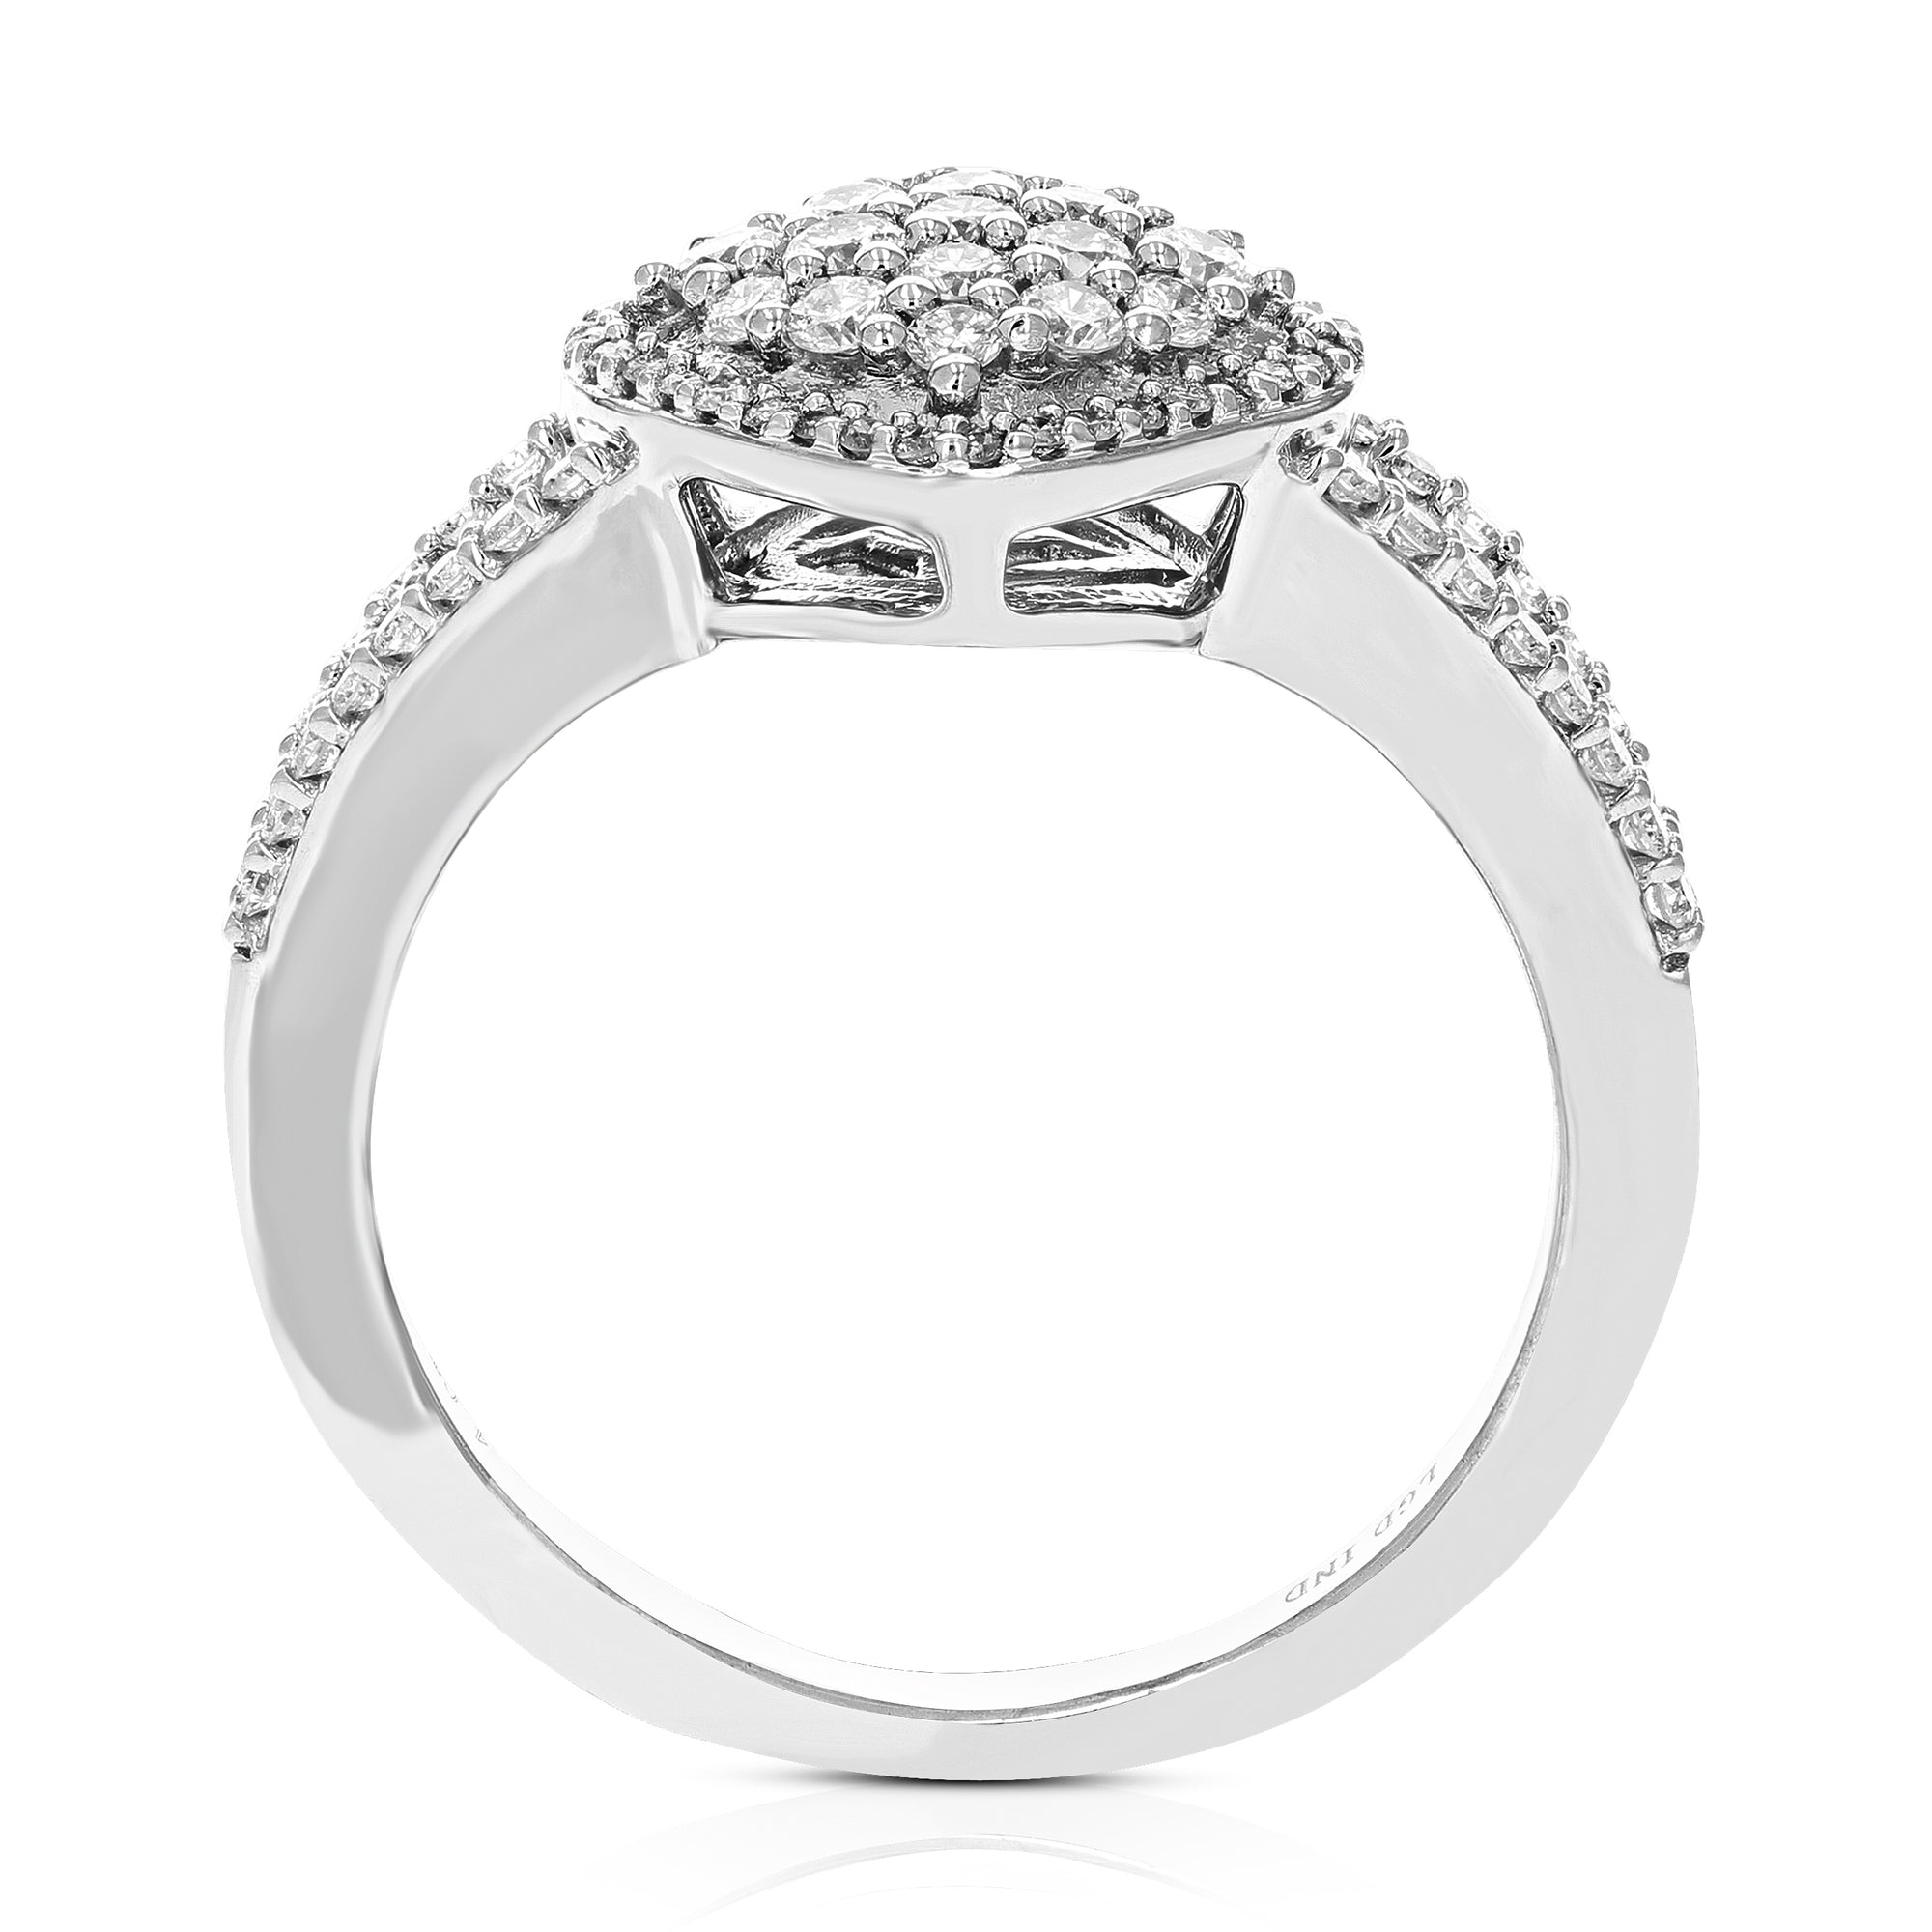 2/3 cttw Diamond Engagement Ring for Women, Round Lab Grown Diamond Ring in 0.925 Sterling Silver, Prong Setting, Size 6-8